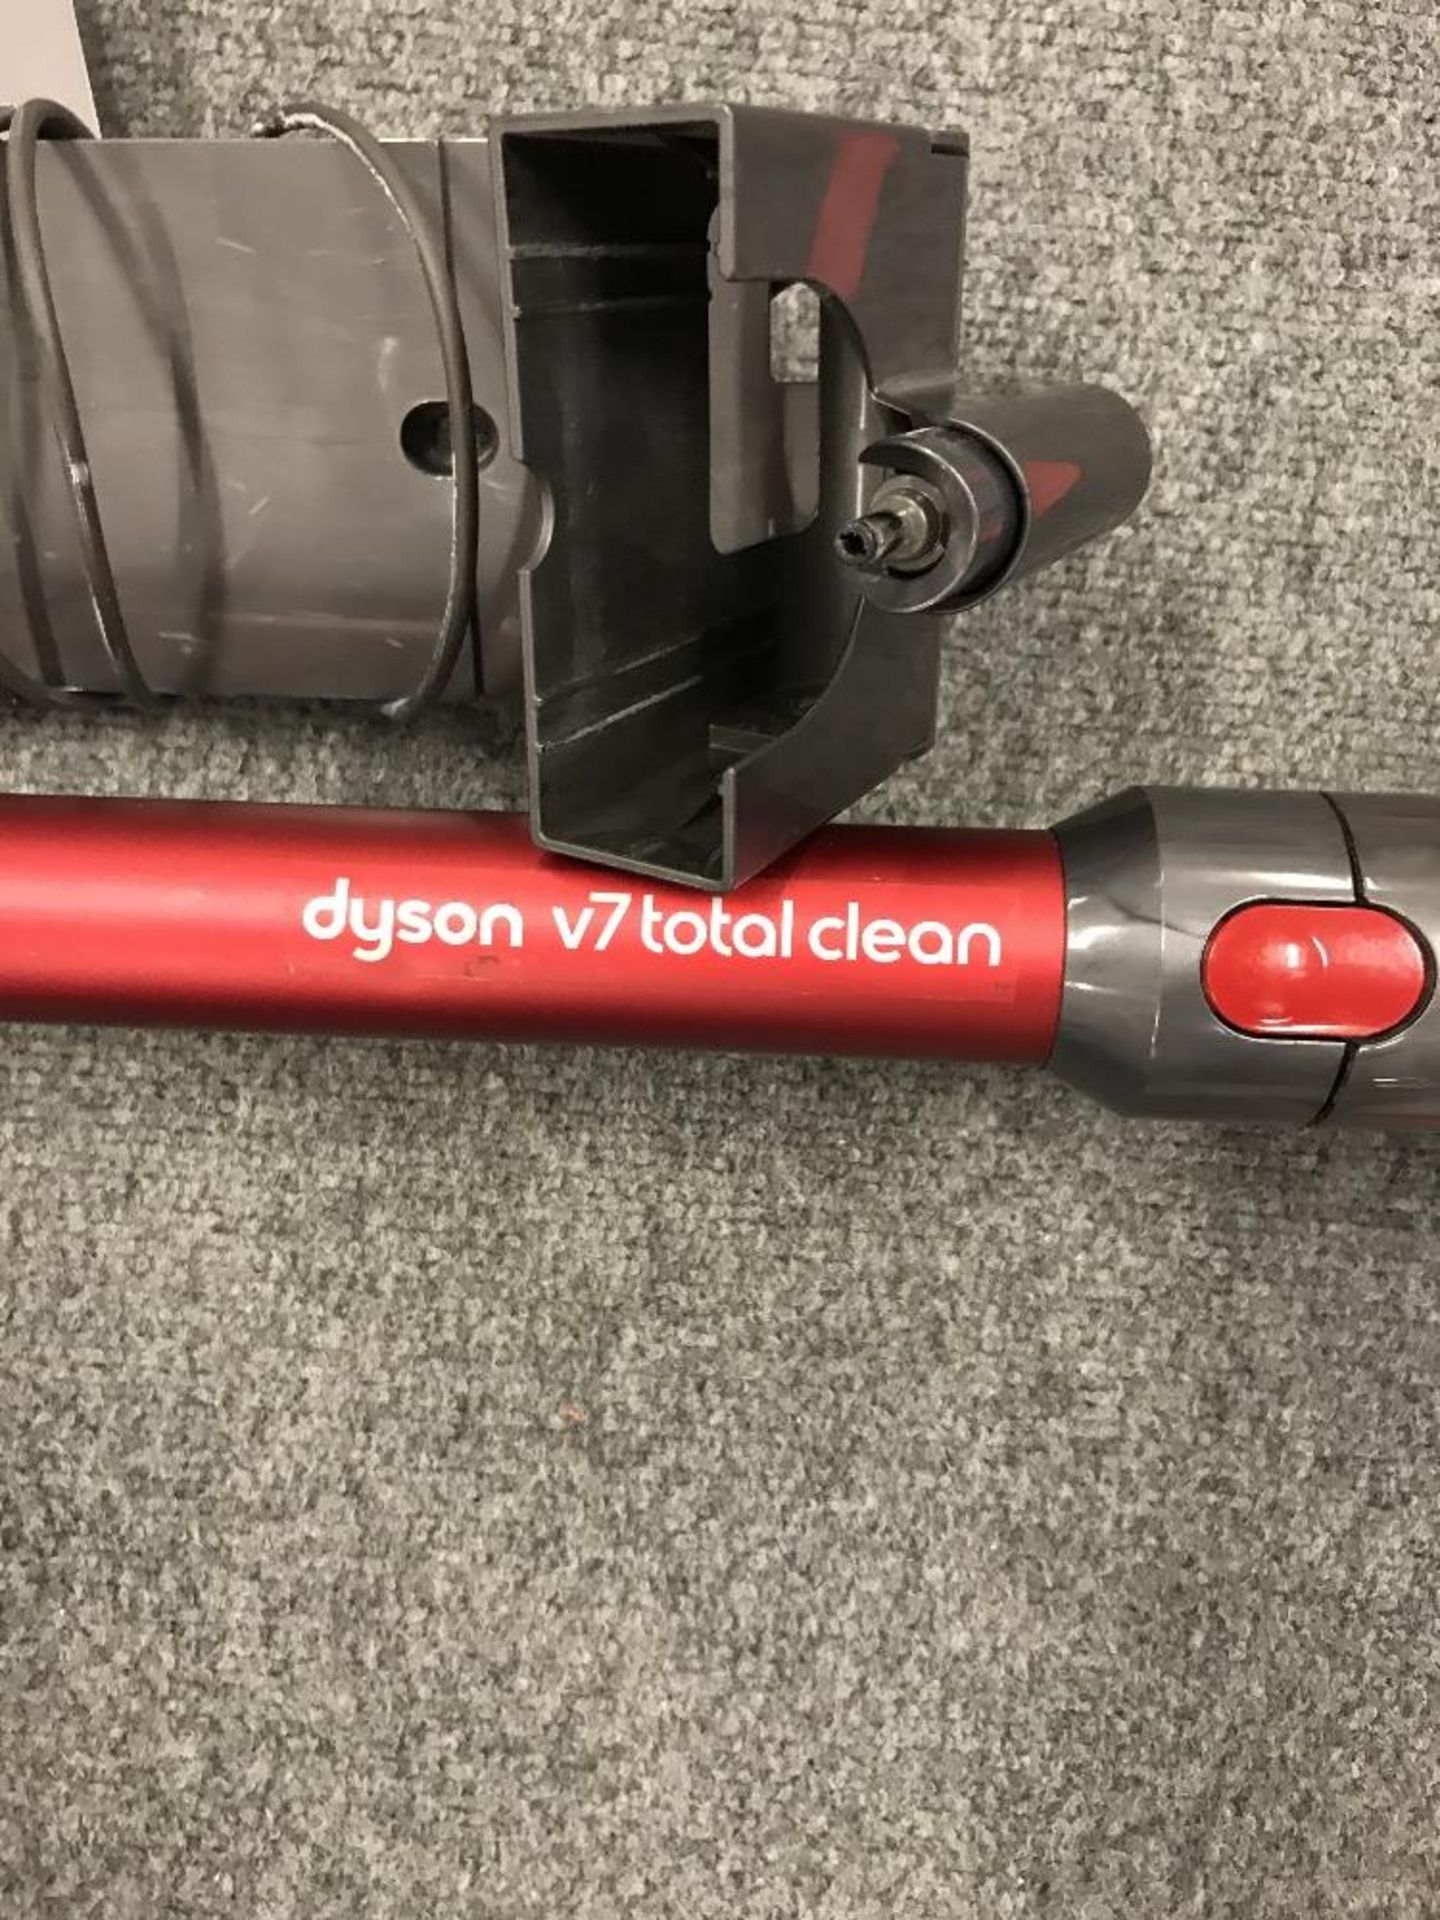 Dyson V7 Total Clean rechargeable hand held vacuum cleaner - Image 2 of 5